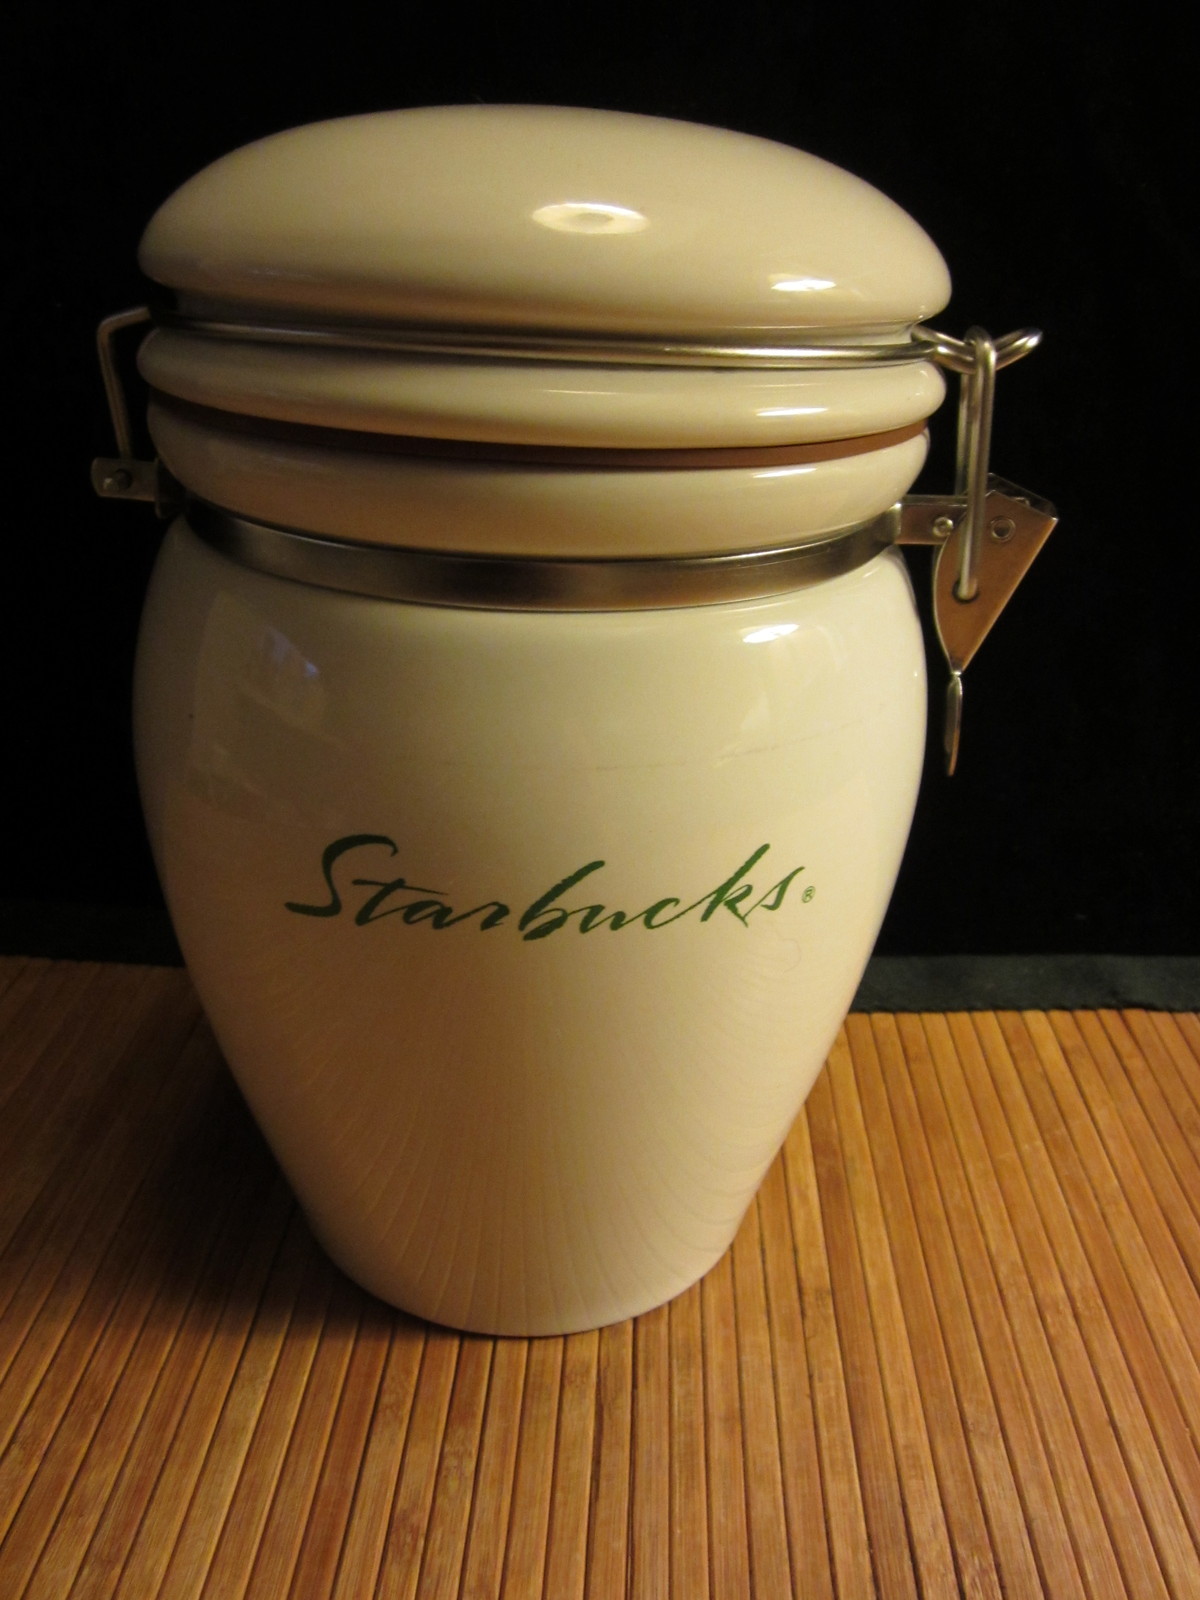 Primary image for Starbucks Coffee Cookies Snacks Biscotti Canister Jar Green Cursive Logo 7" Tall